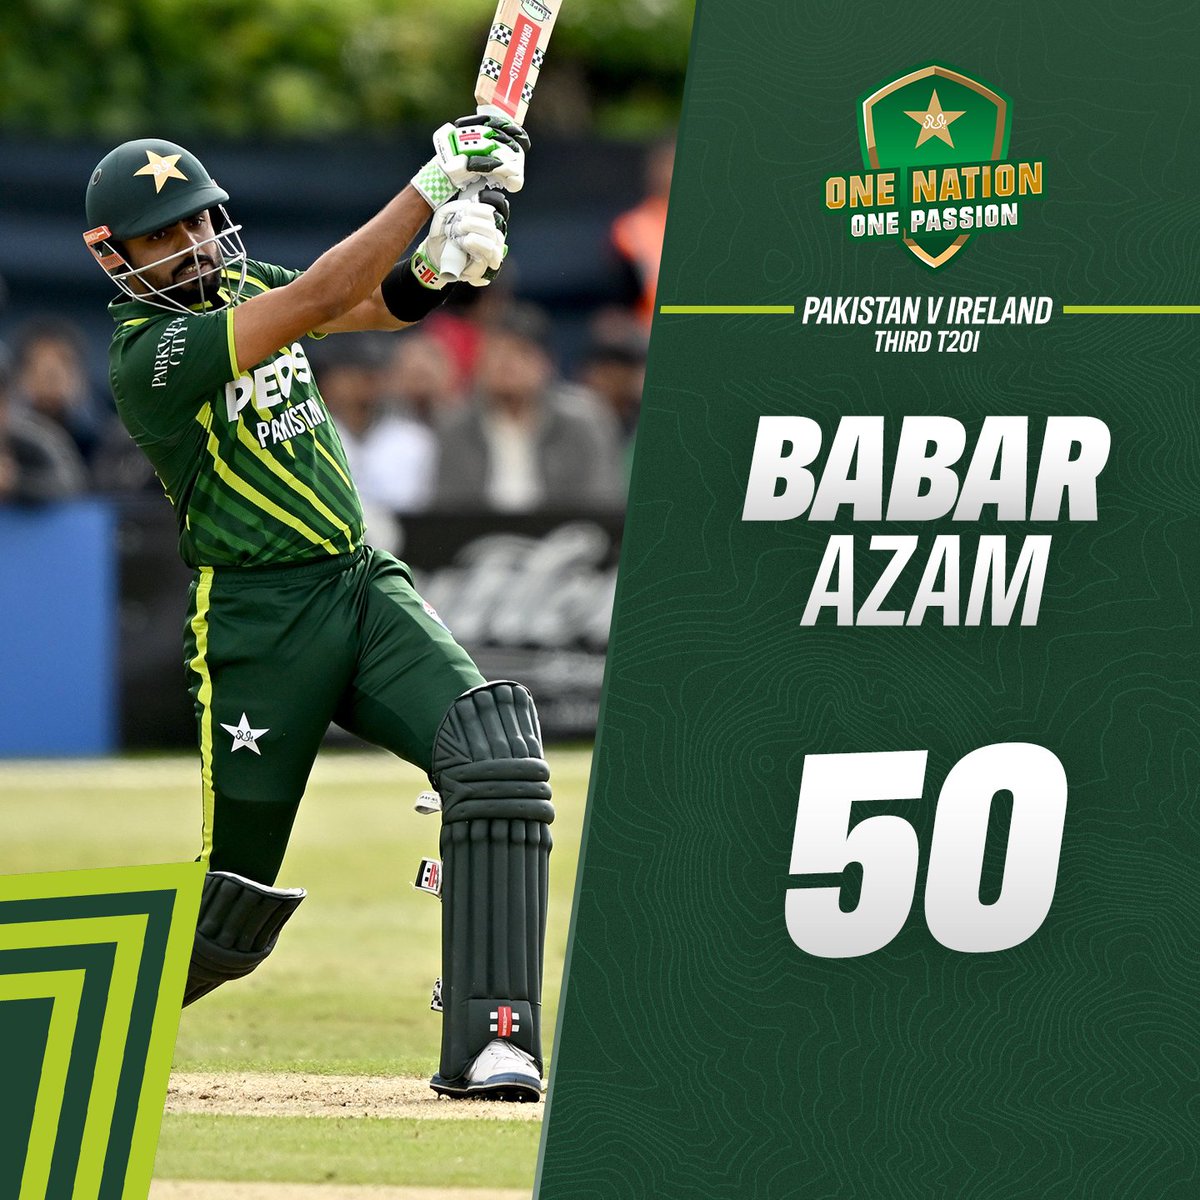 The captain is putting on a show 🔥

Babar Azam scores his 36th T20I fifty ✨

#IREvPAK | #BackTheBoysInGreen